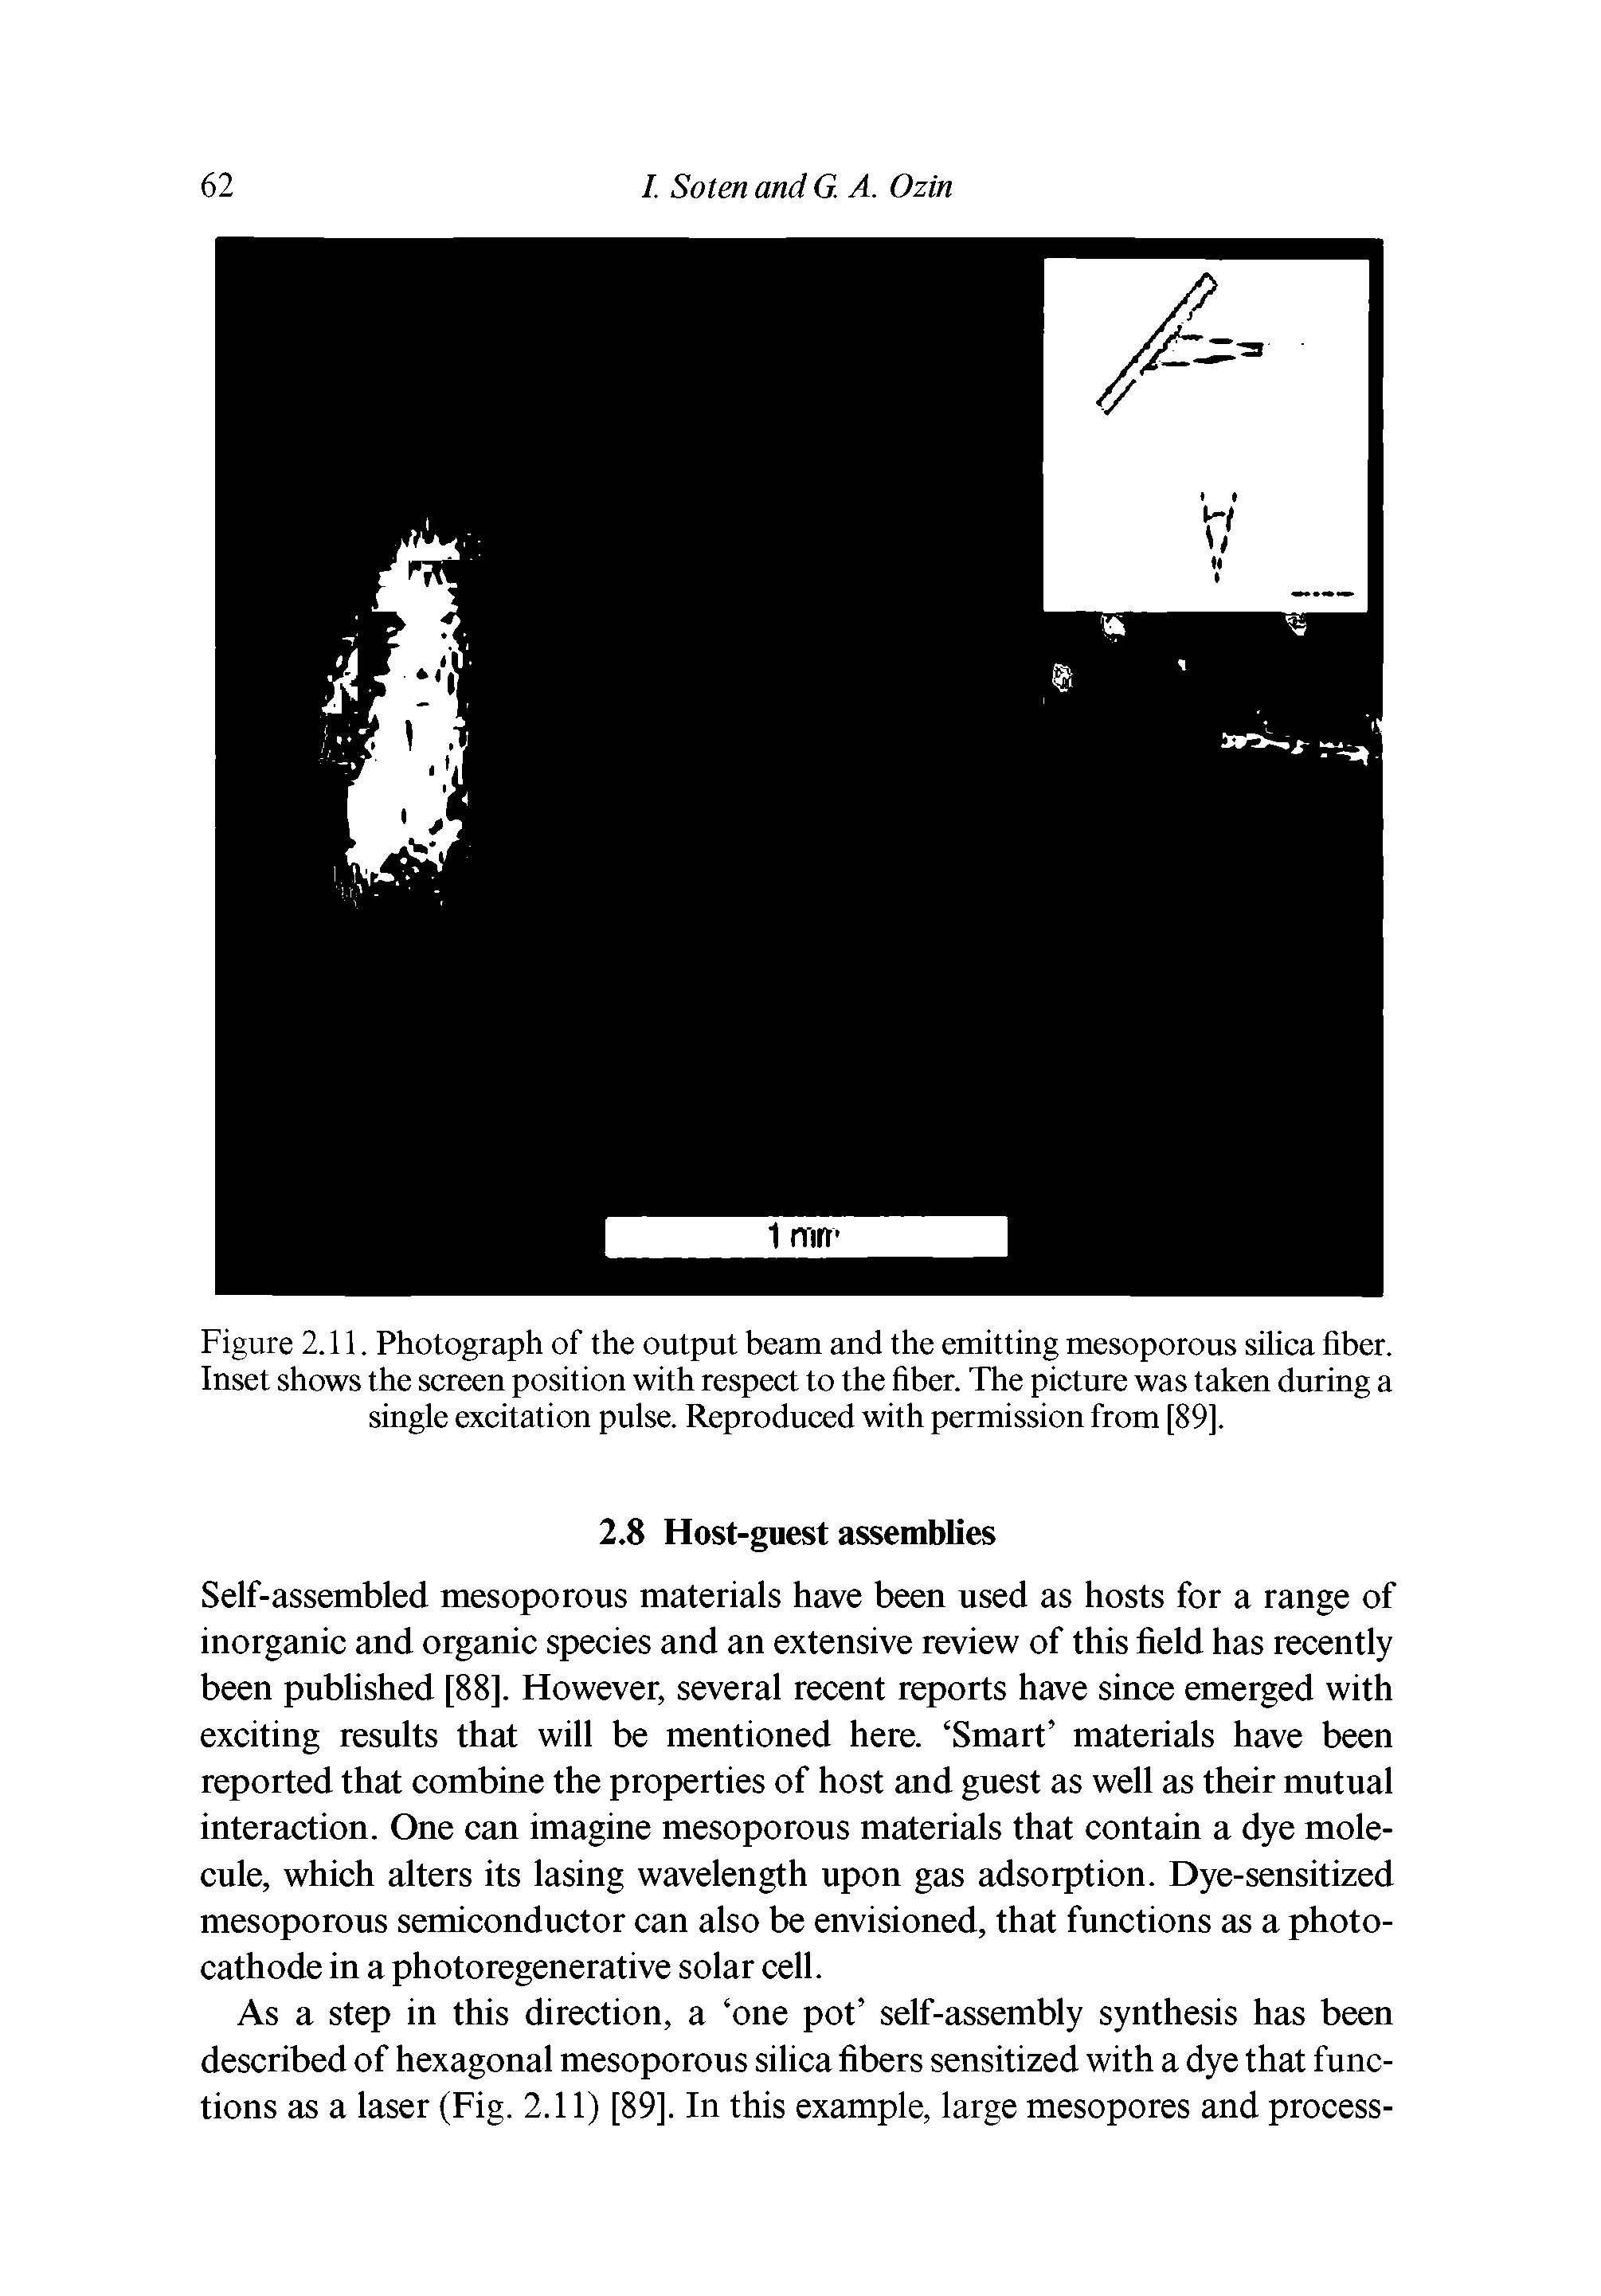 Figure 2.11. Photograph of the output beam and the emitting mesoporous silica fiber. Inset shows the screen position with respect to the fiber. The picture was taken during a single excitation pulse. Reproduced with permission from [89],...